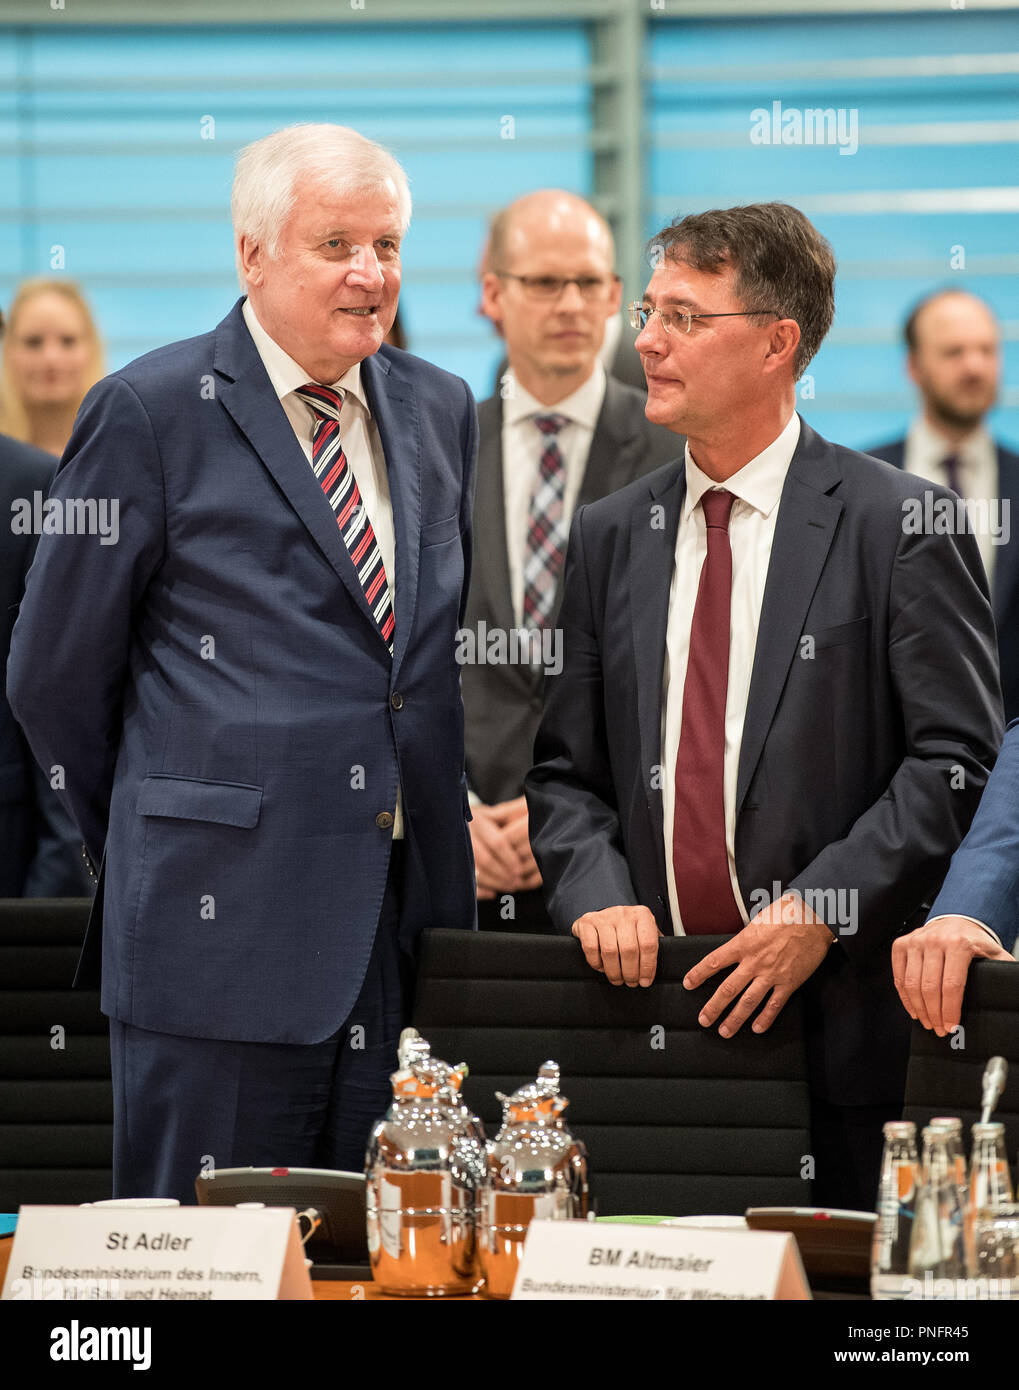 21 September 2018, Berlin: Horst Seehofer (L), Federal Minister of the Interior (CSU), stands next to Gunther Adler, State Secretary in the Ministry of the Interior (SPD), at the beginning of the residential summit in the Federal Chancellery. The agenda includes discussions with experts and politicians on the subject of affordable housing, reducing construction costs and securing skilled labour. Photo: Fabian Sommer/dpa Stock Photo